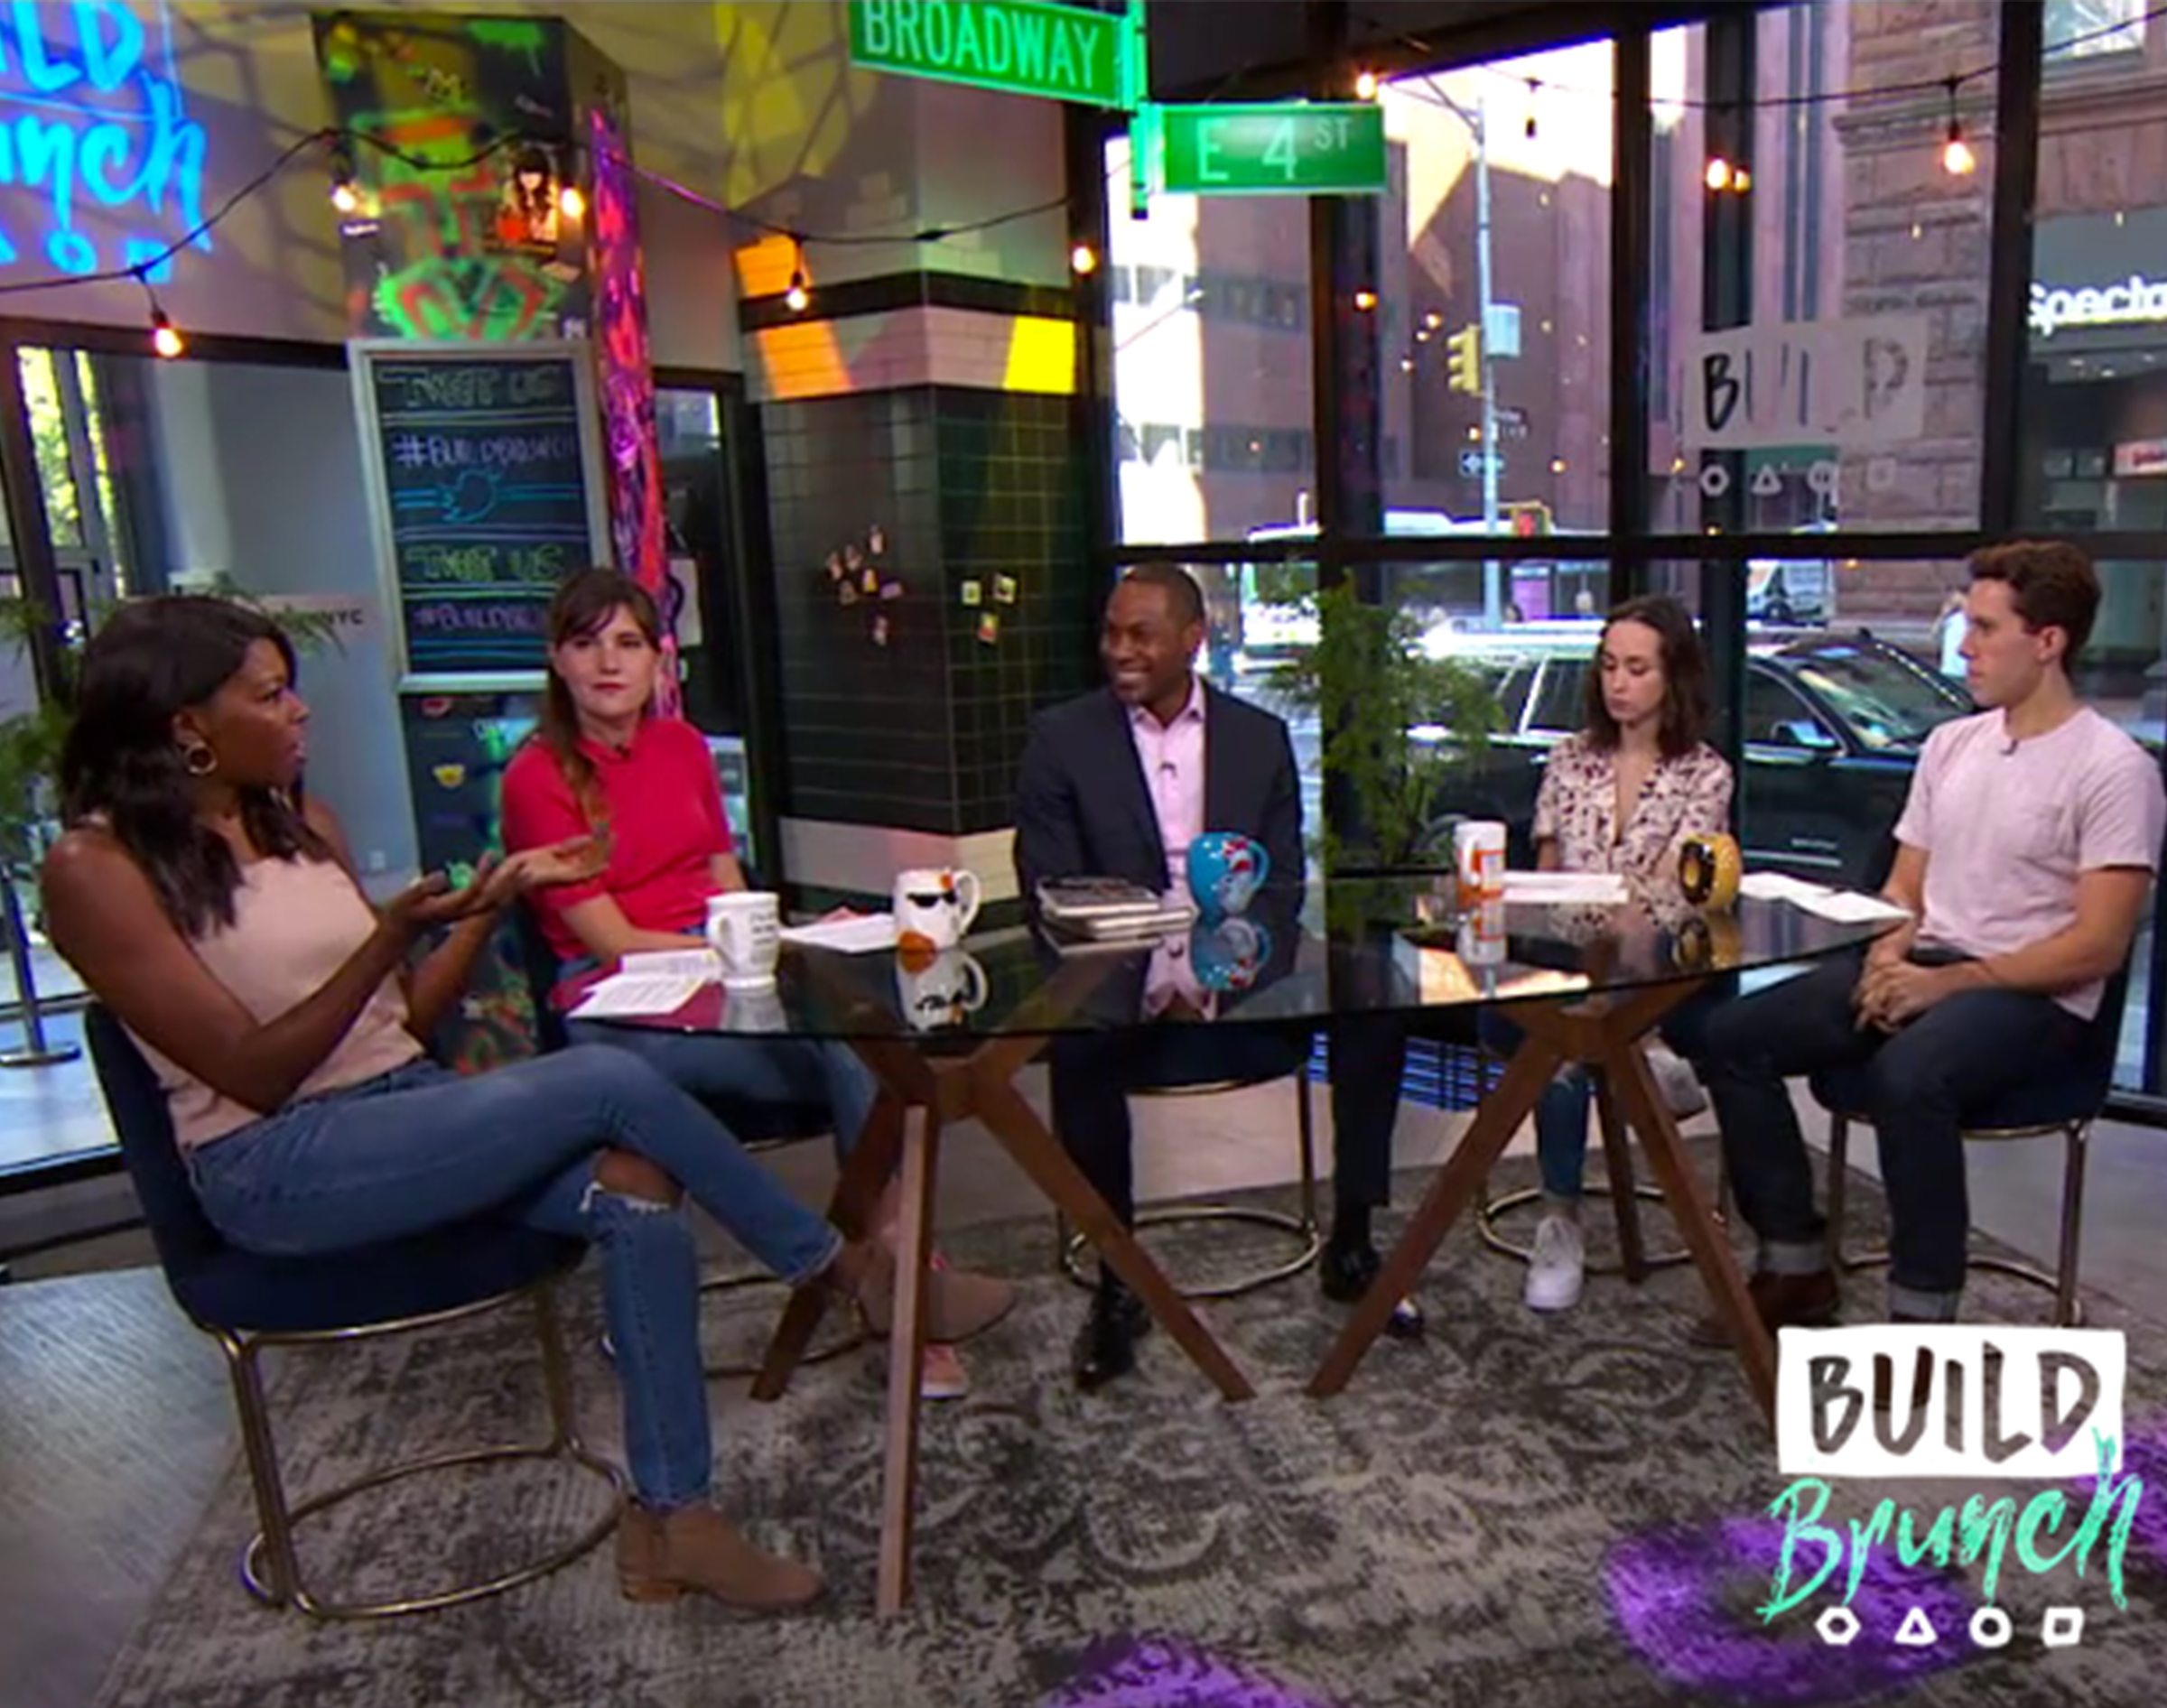 Marion E. Brooks Joins The Table at Build Brunch Studios Live